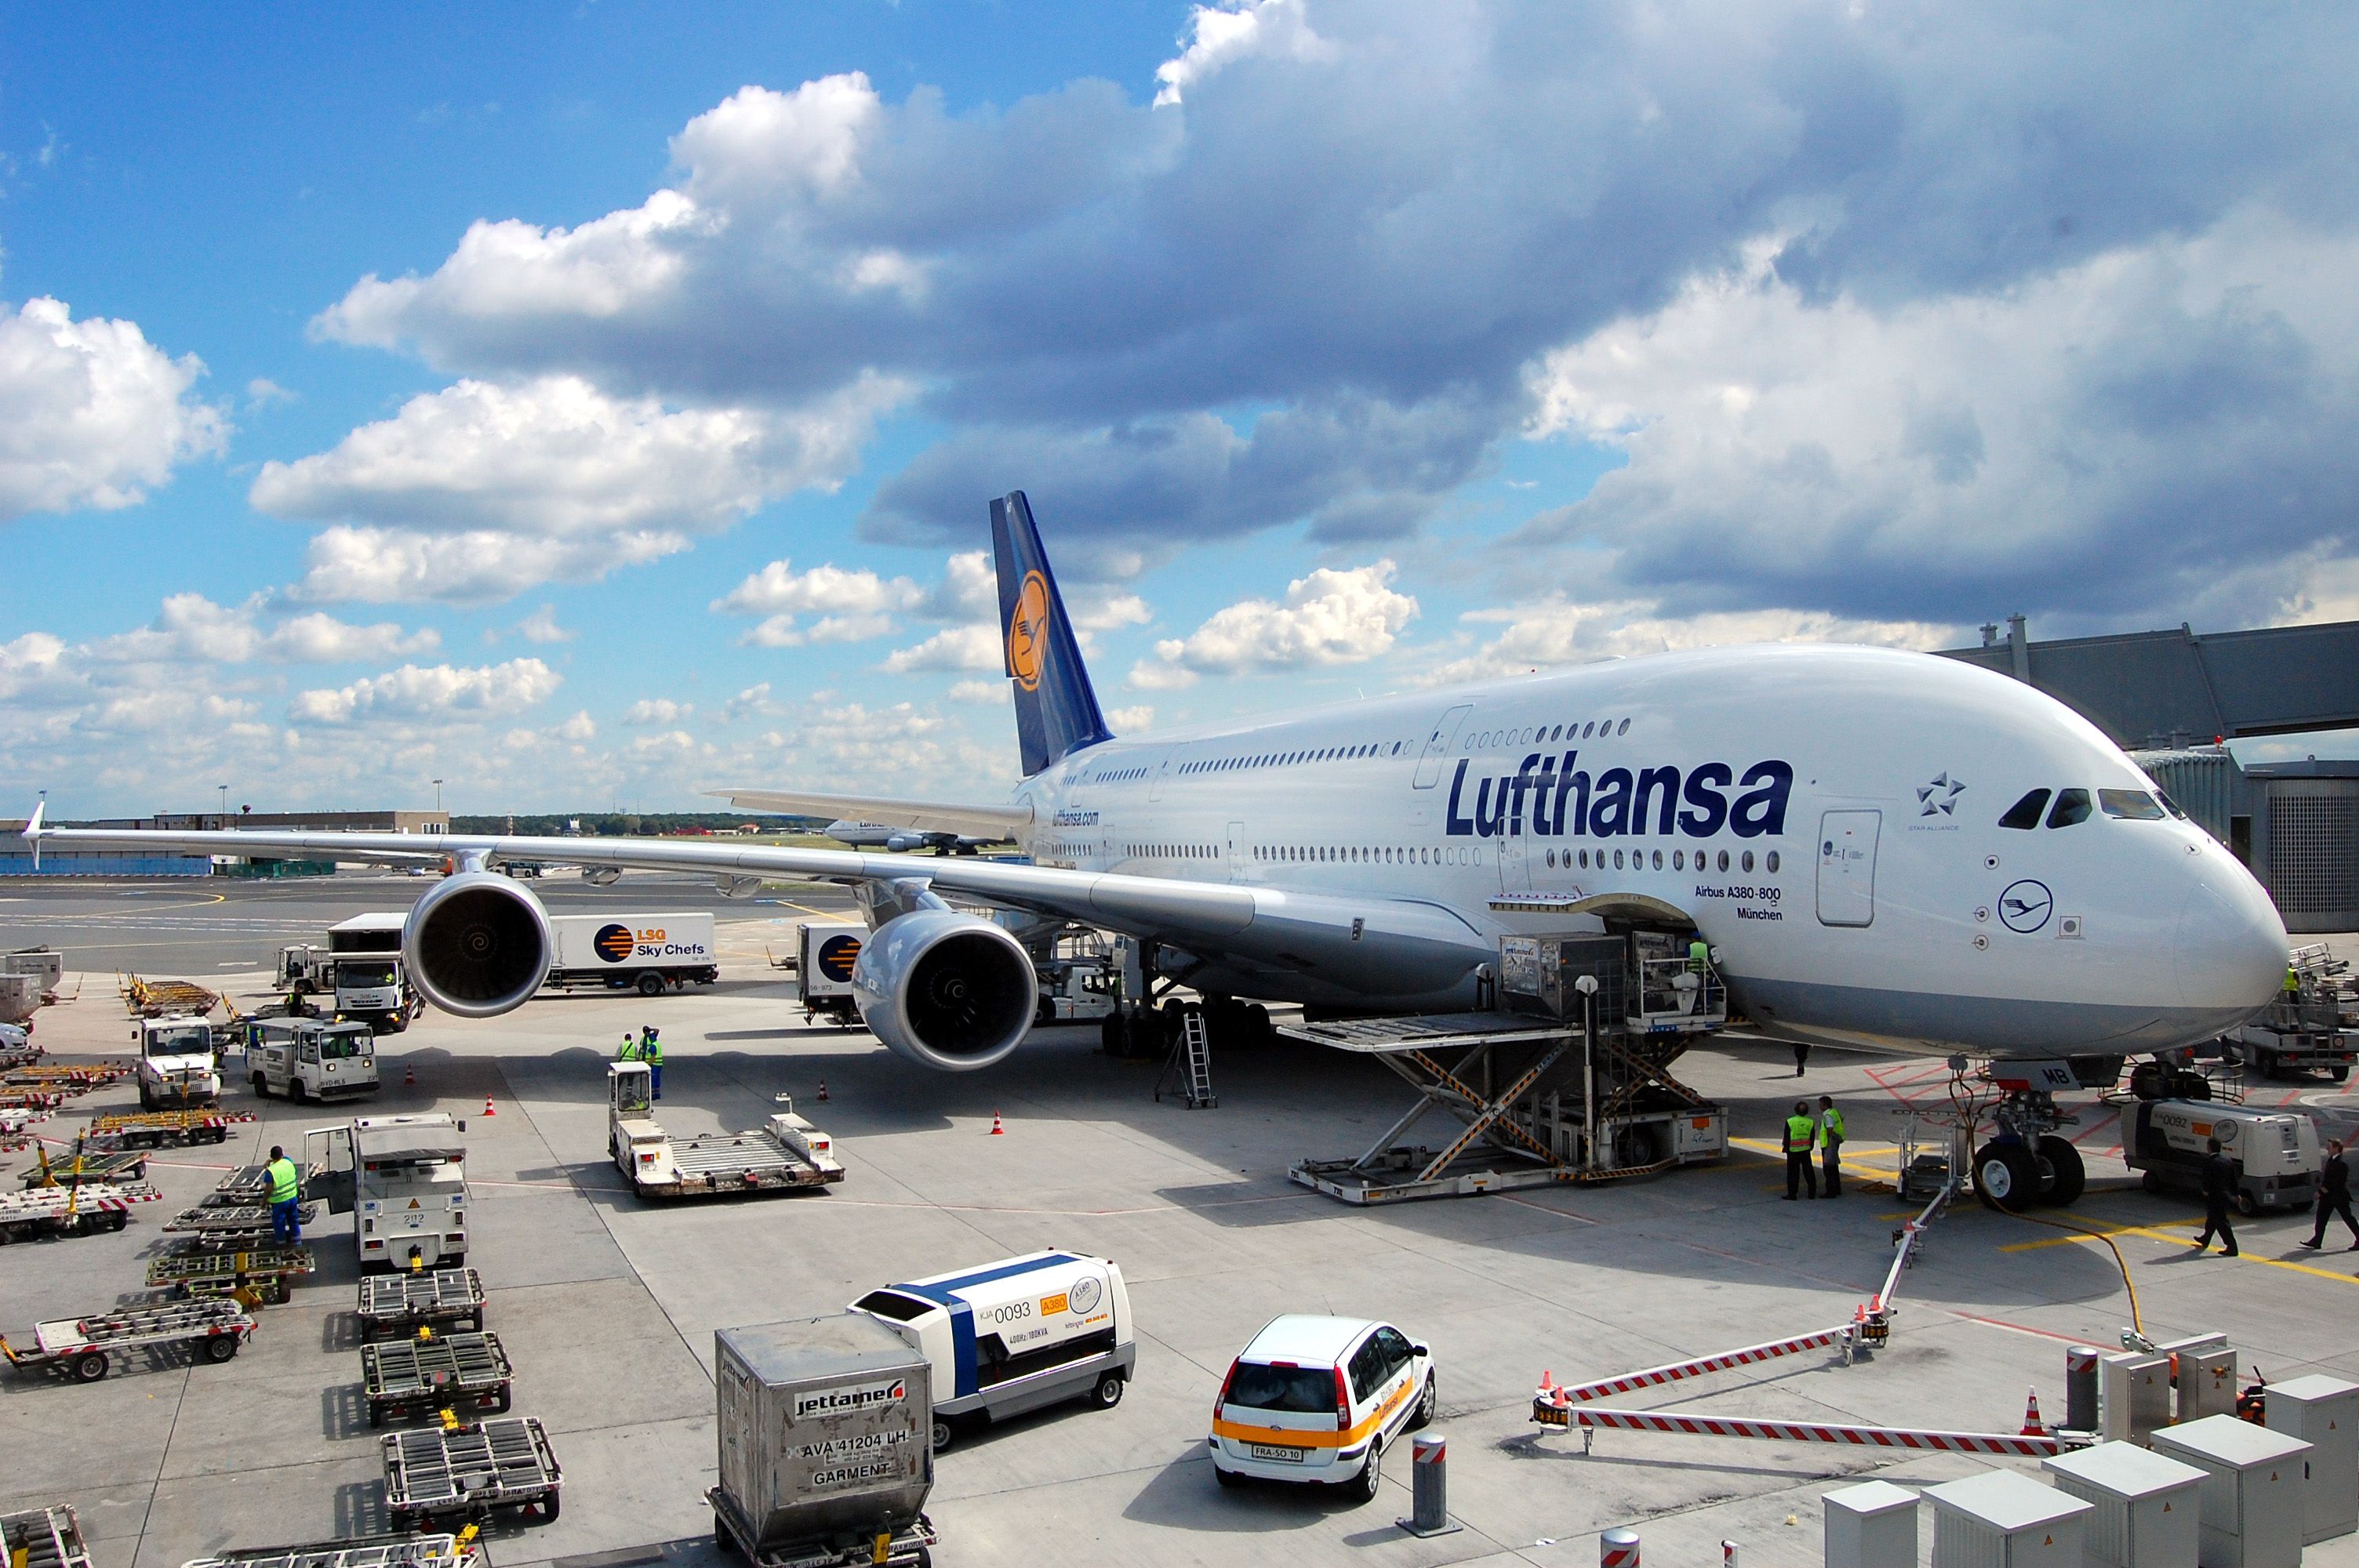 Lufthansa A380 with ground services